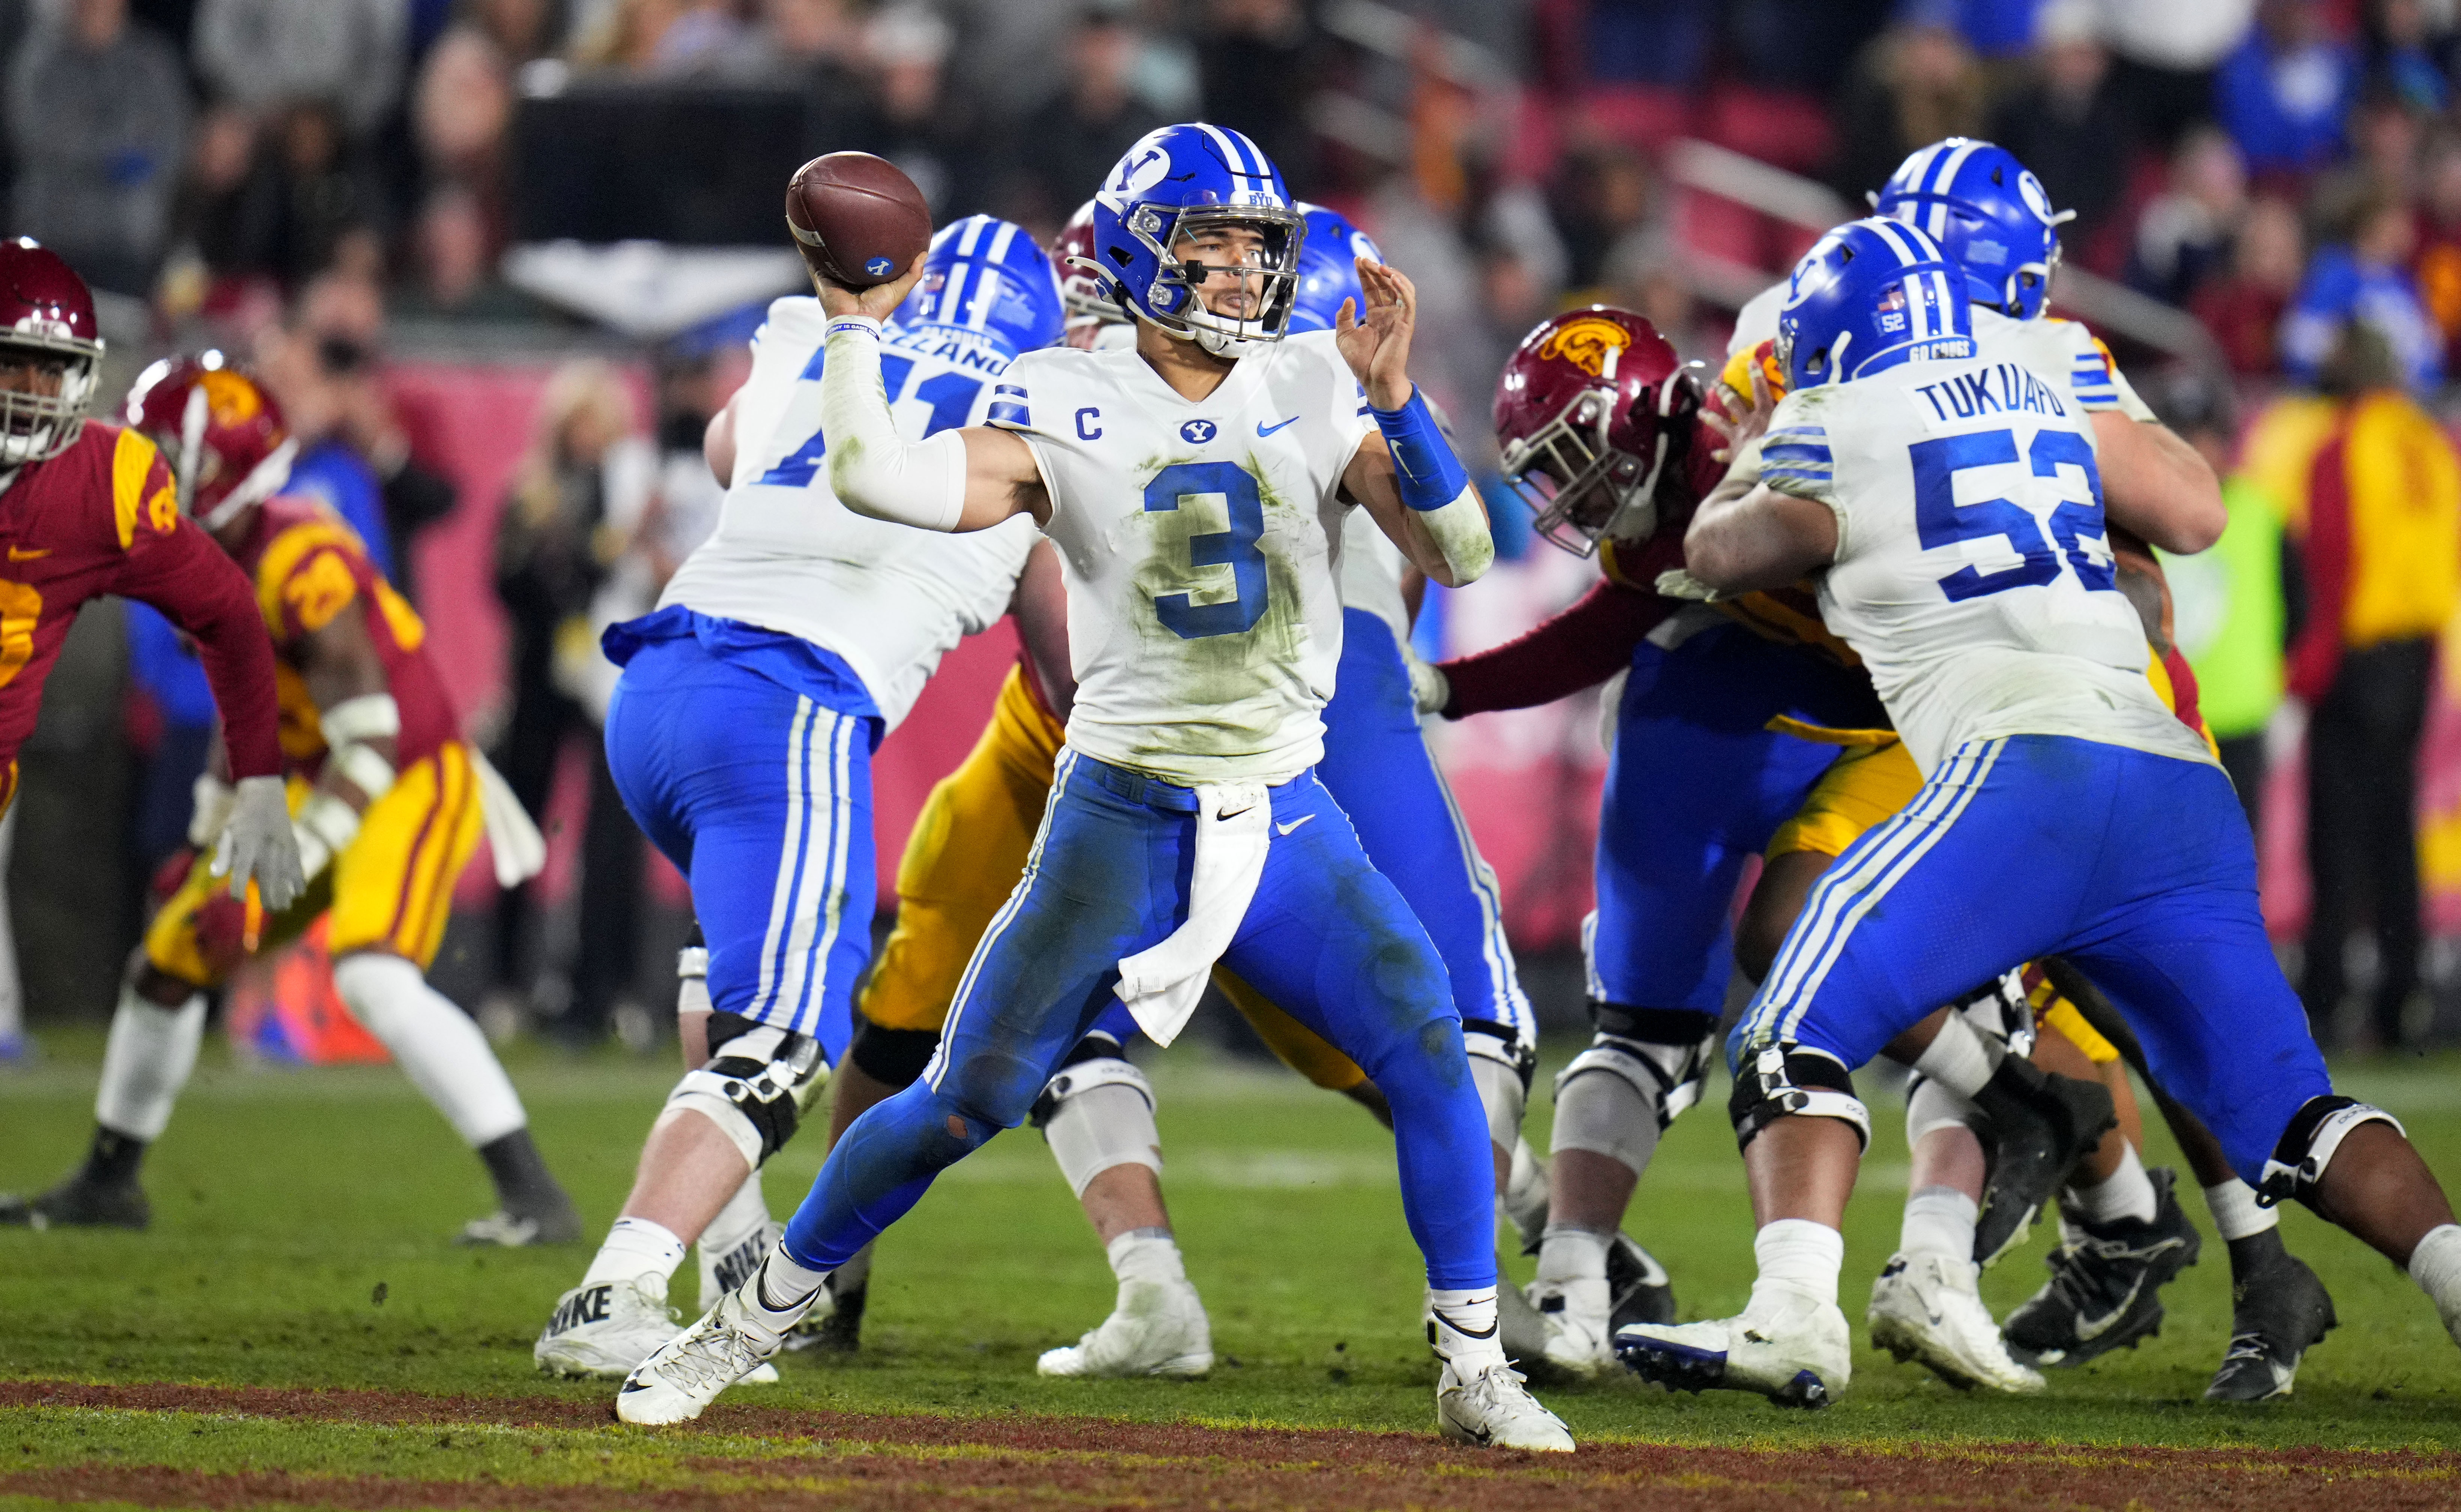 Brigham Young Cougars defeated the USC Trojans 35-31 during a NCAA football game at the Los Angeles Memorial Coliseum in Los Angeles.